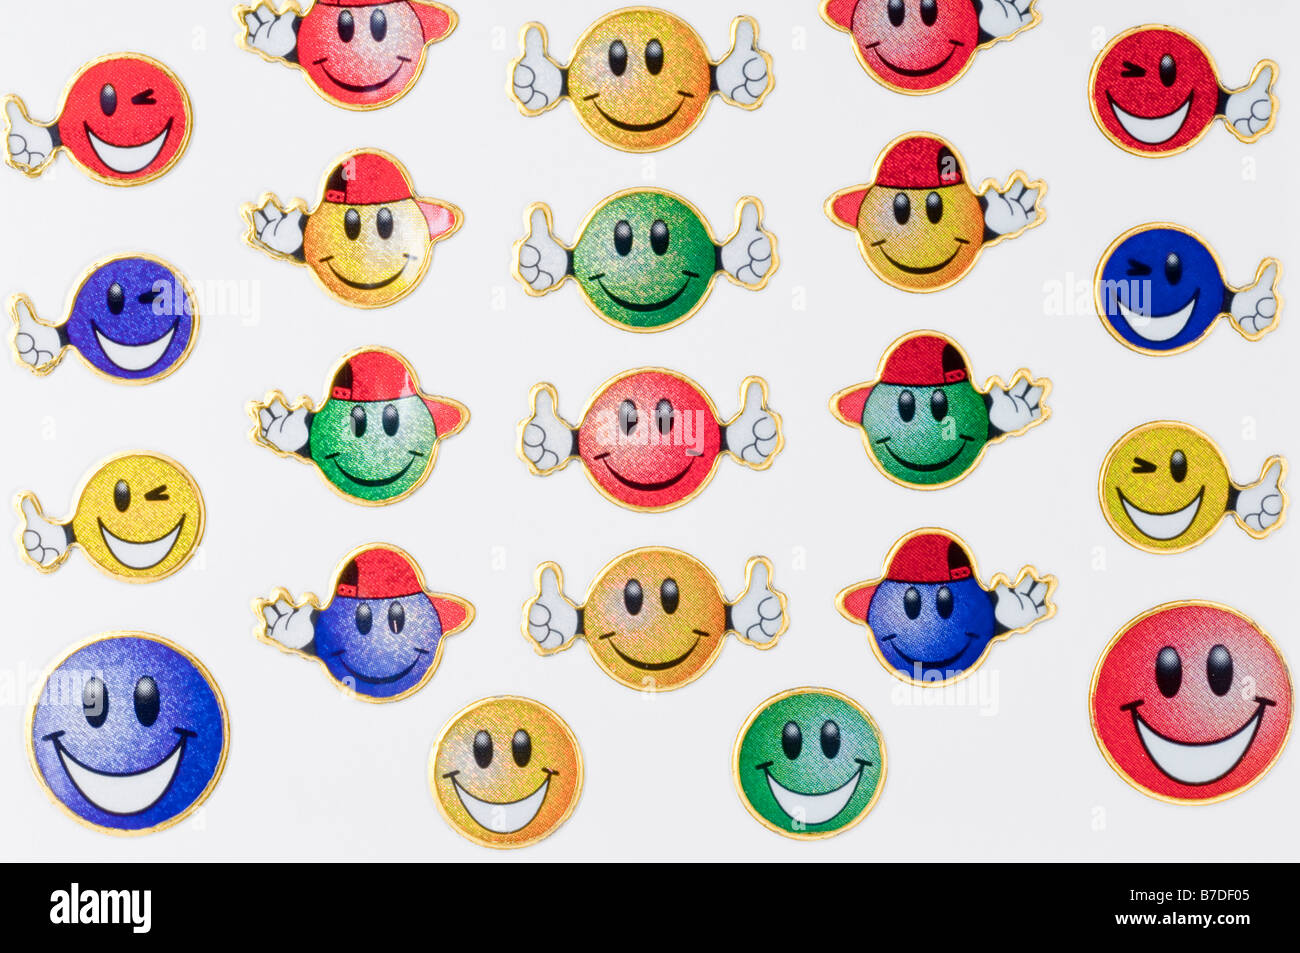 A Close up of smiley face childrens stickers Stock Photo